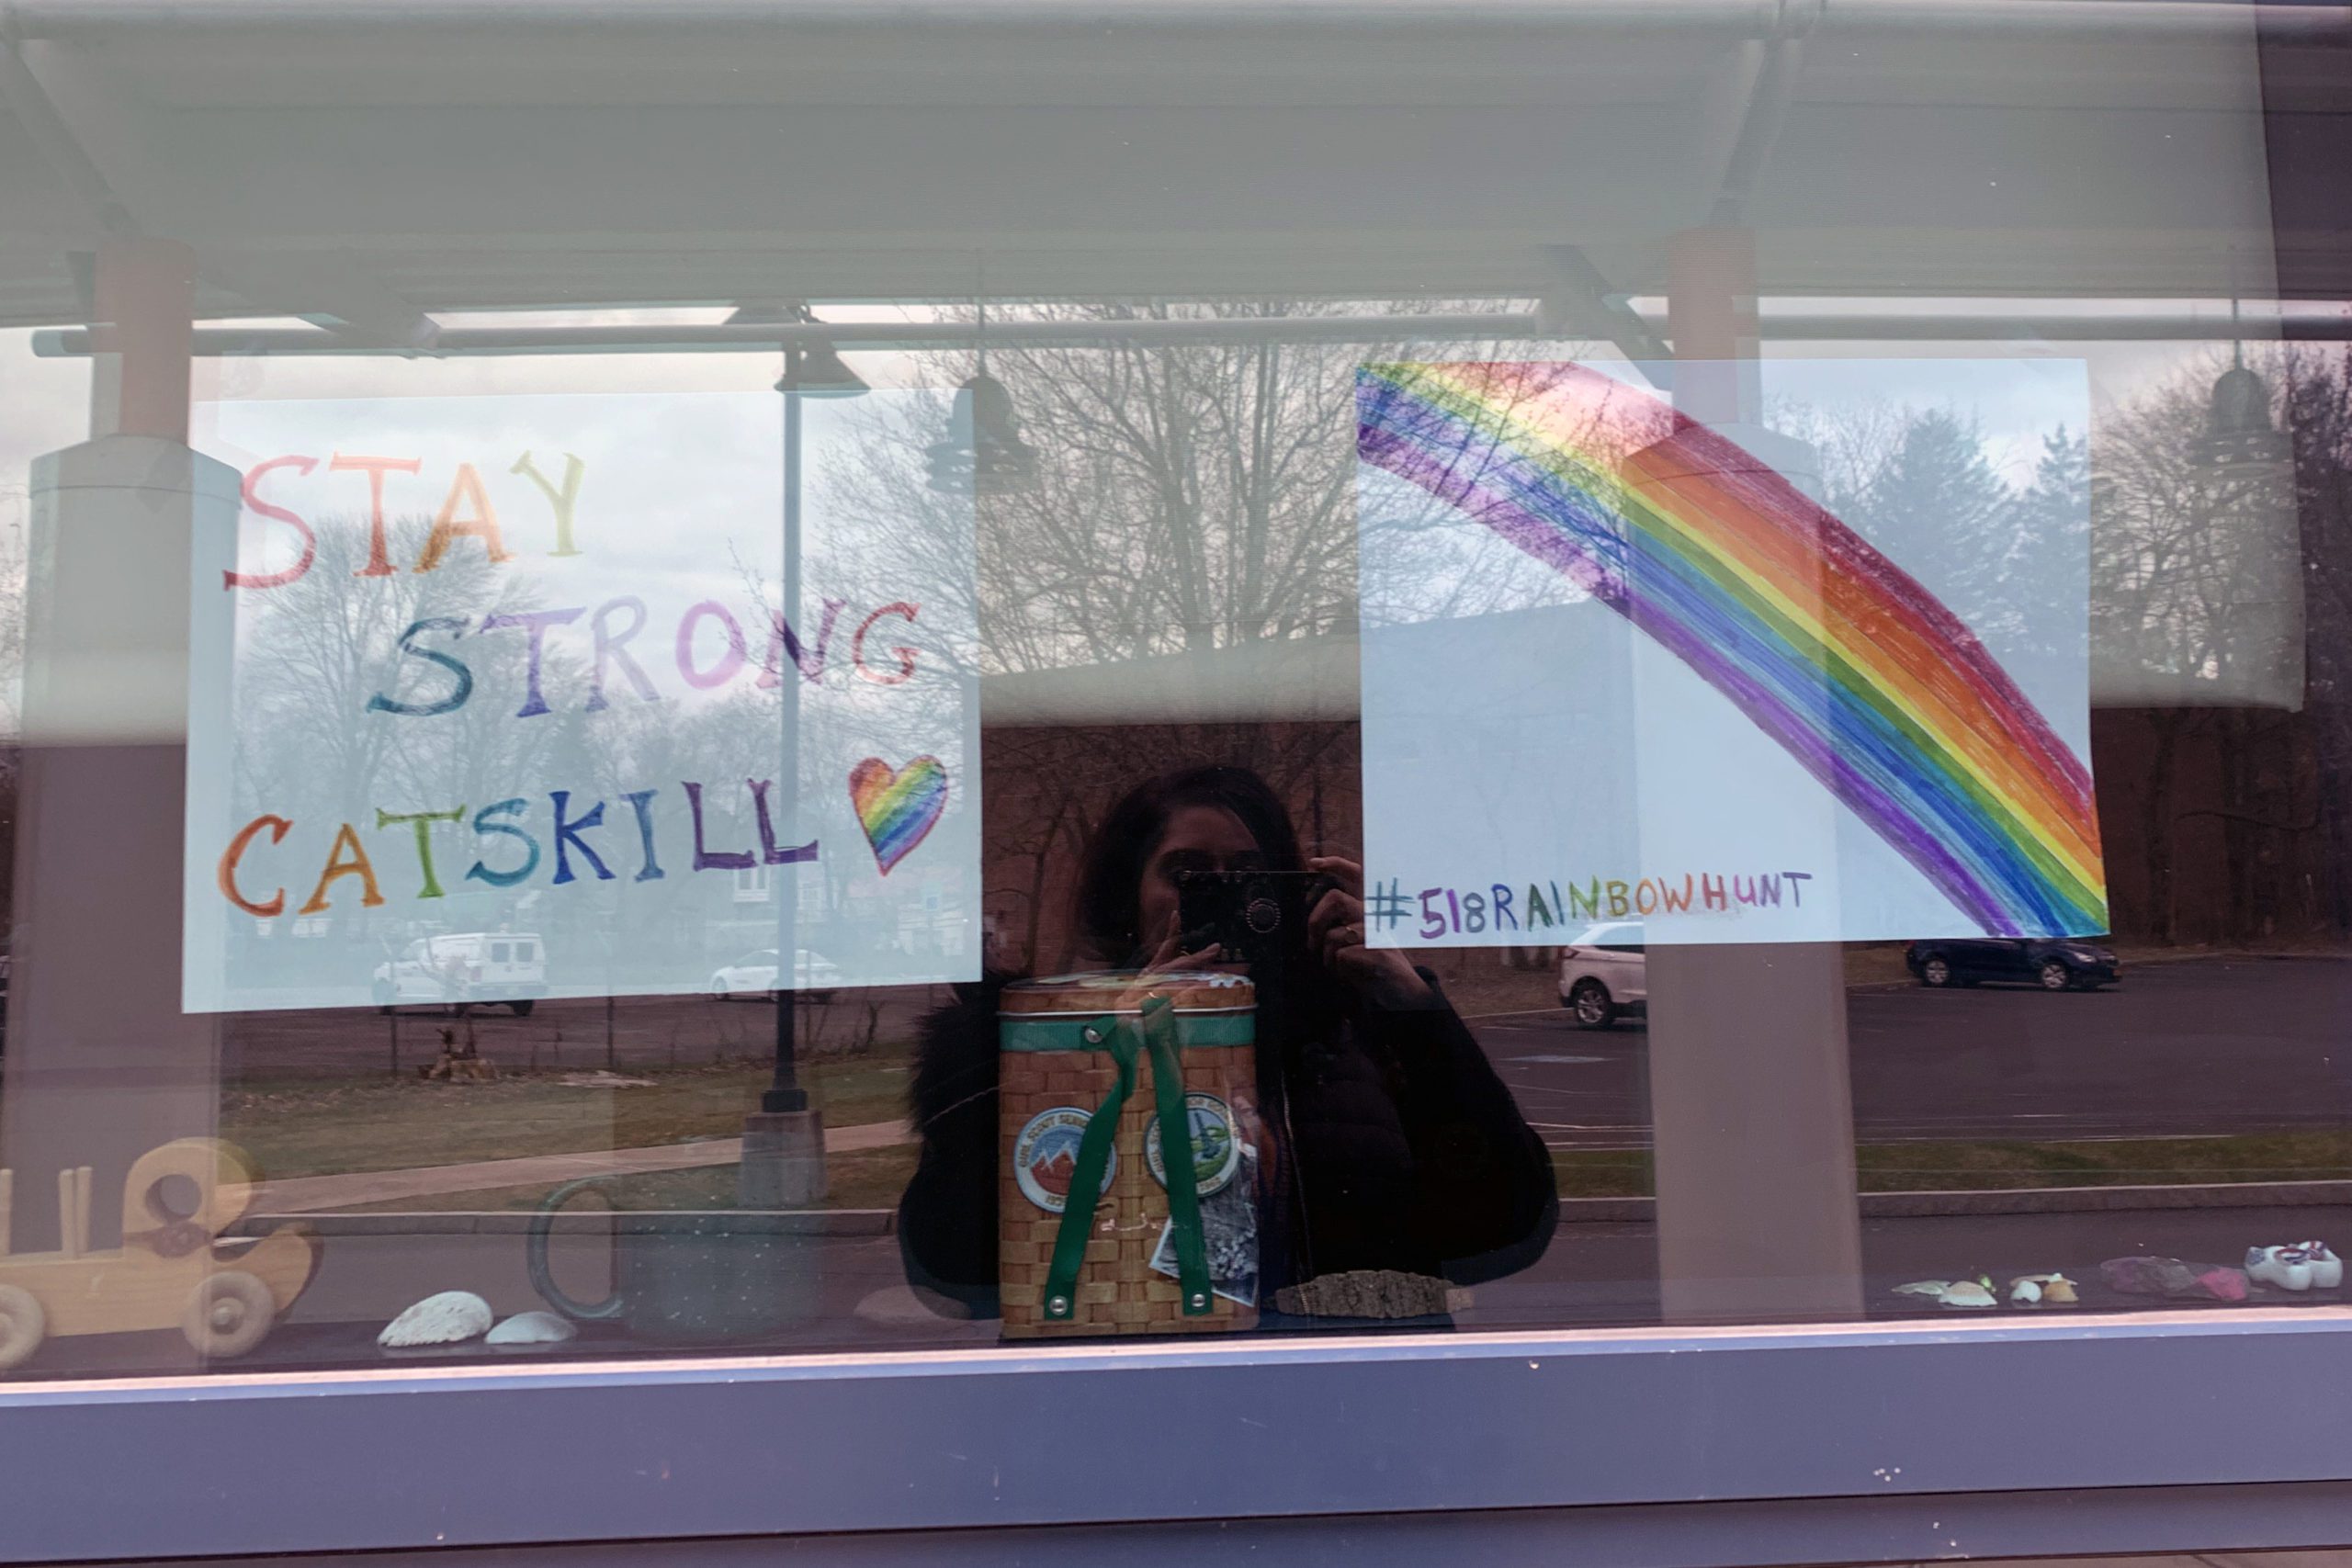 rainbow picture and sign saying Stay Strong Catskill